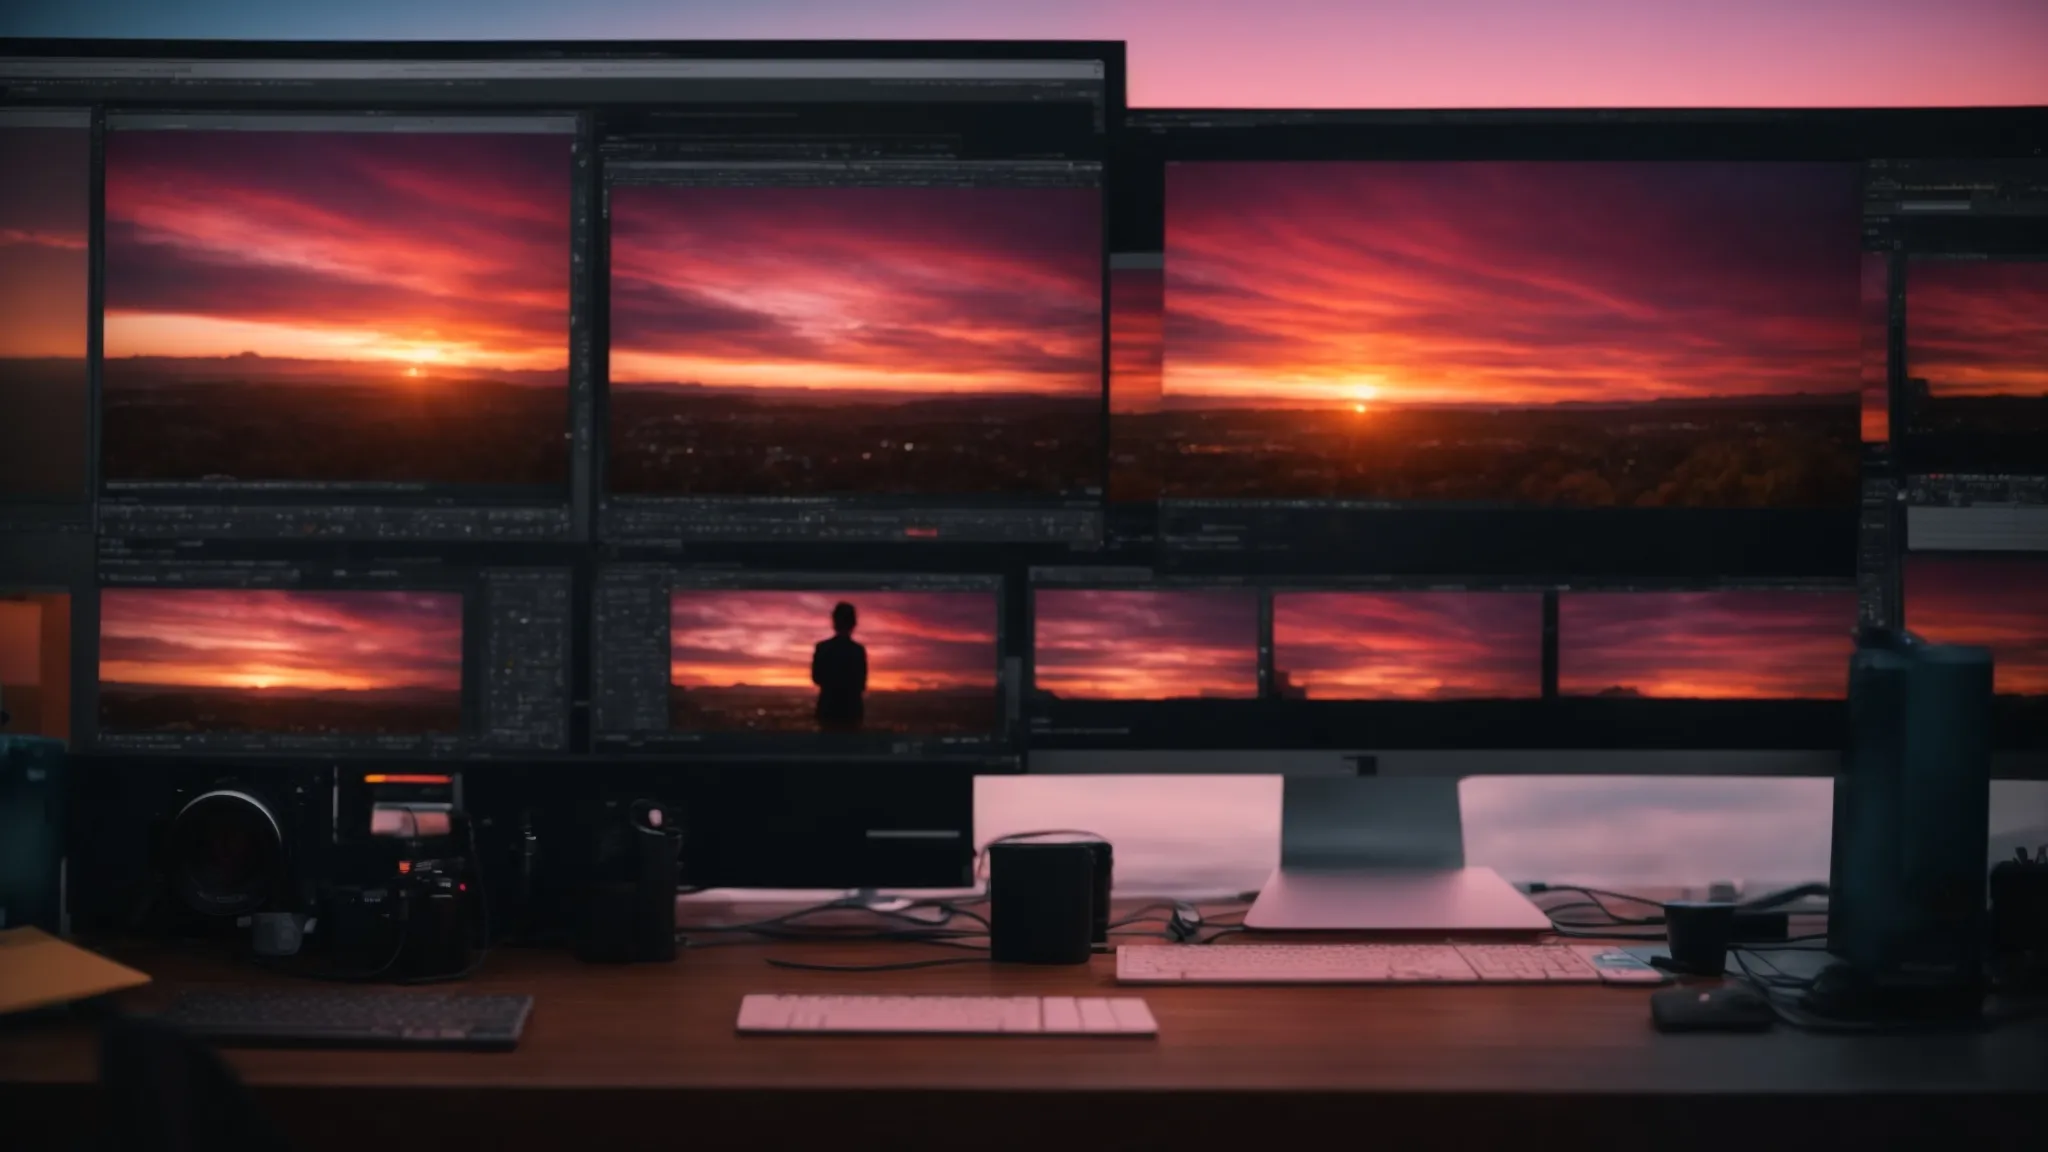 a filmmaker edits a movie on a computer, adjusting the colors of a vibrant sunset scene on the screen.